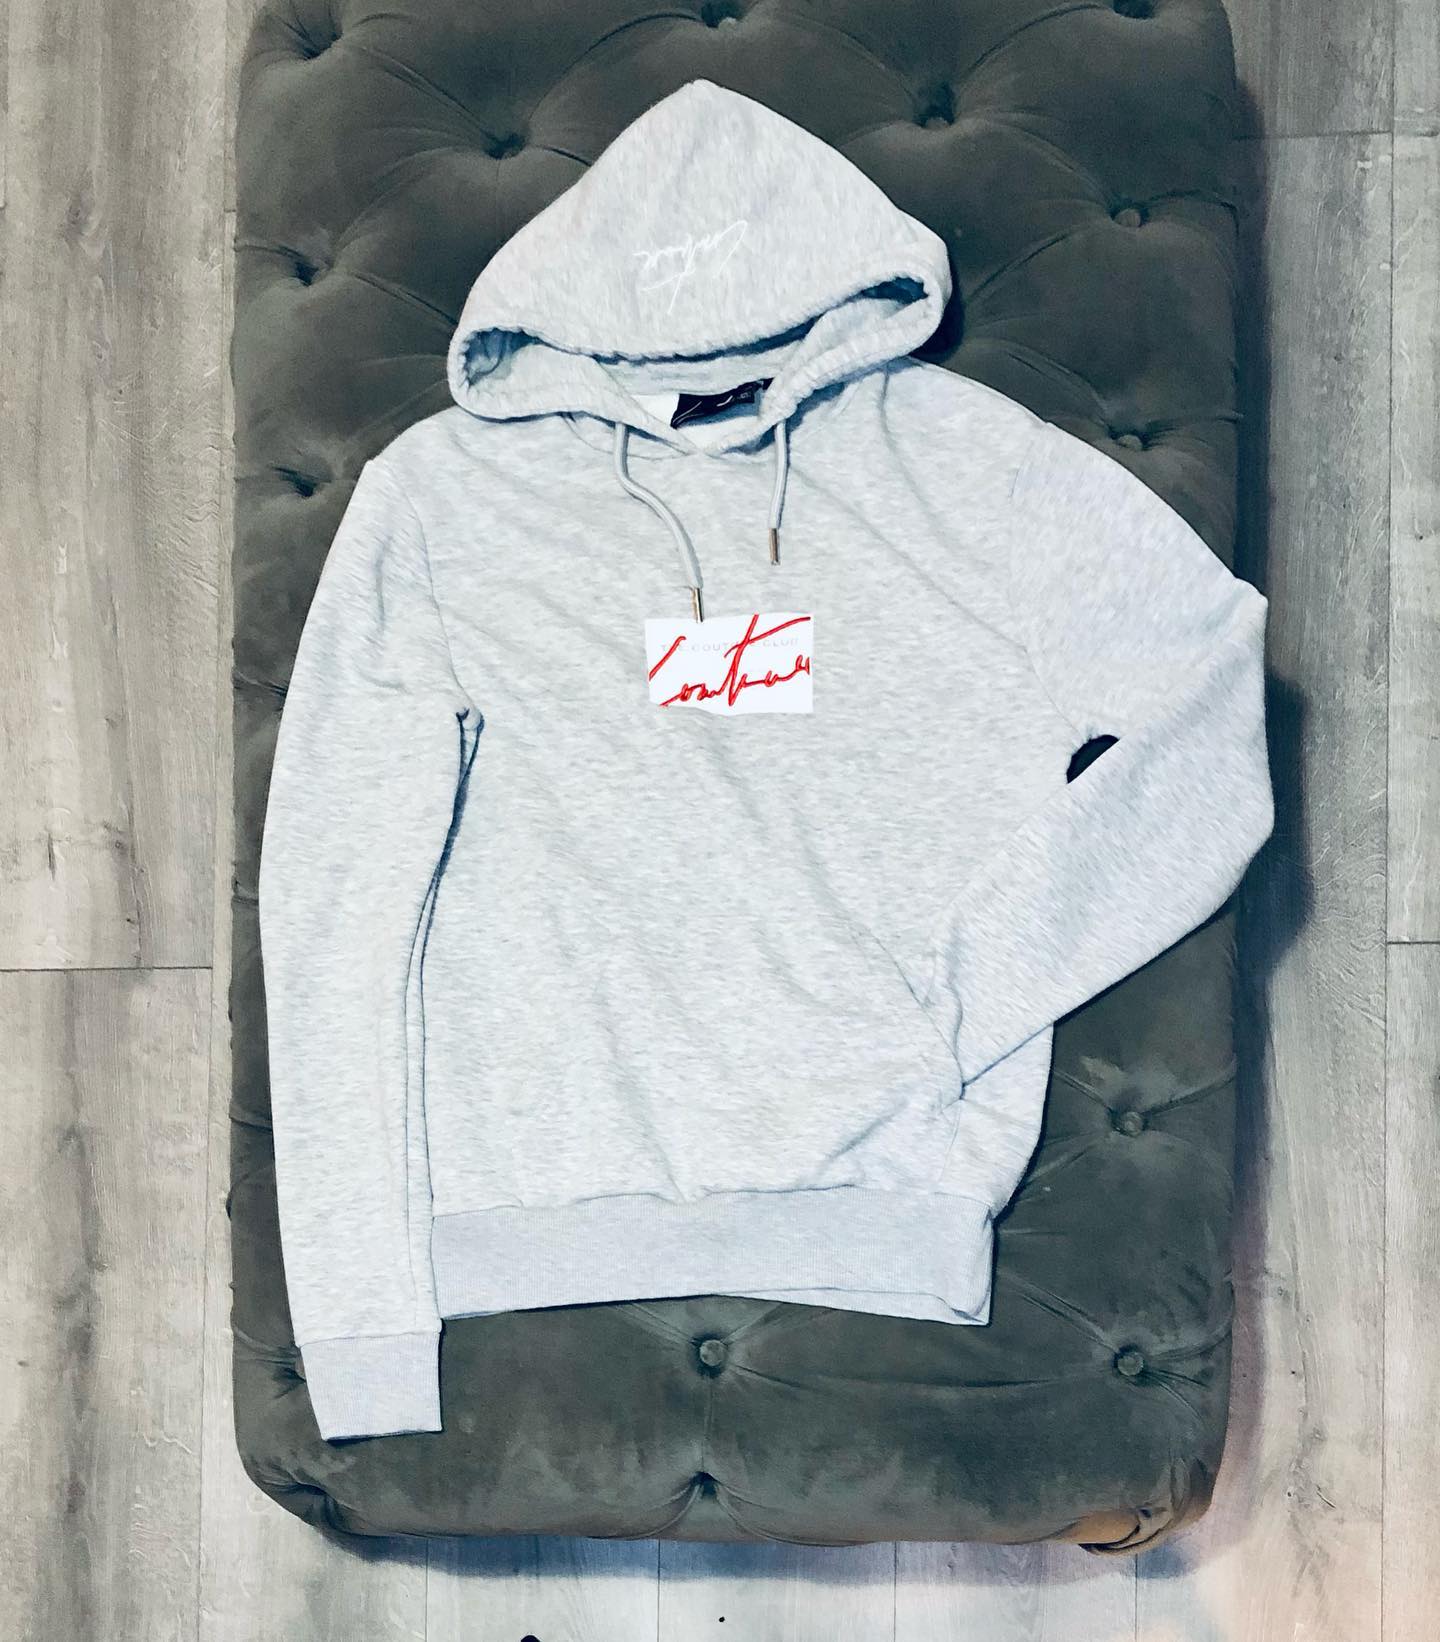 THE COUTURE CLUB GREY JERSEY HOODY TRACKSUIT
Size s